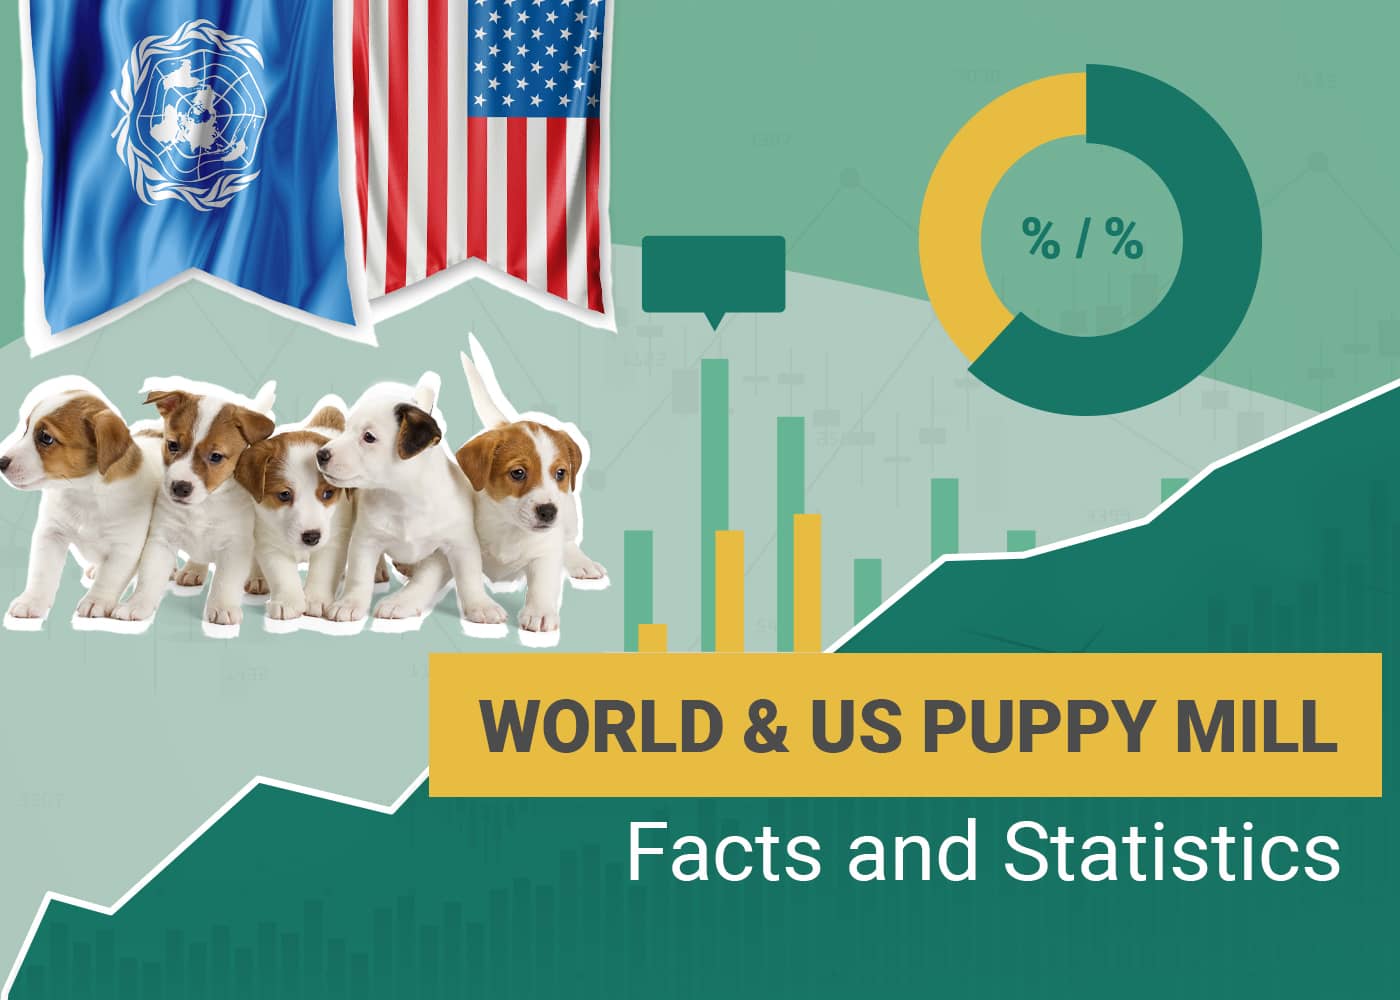 World & US Puppy Mill Facts and Statistics